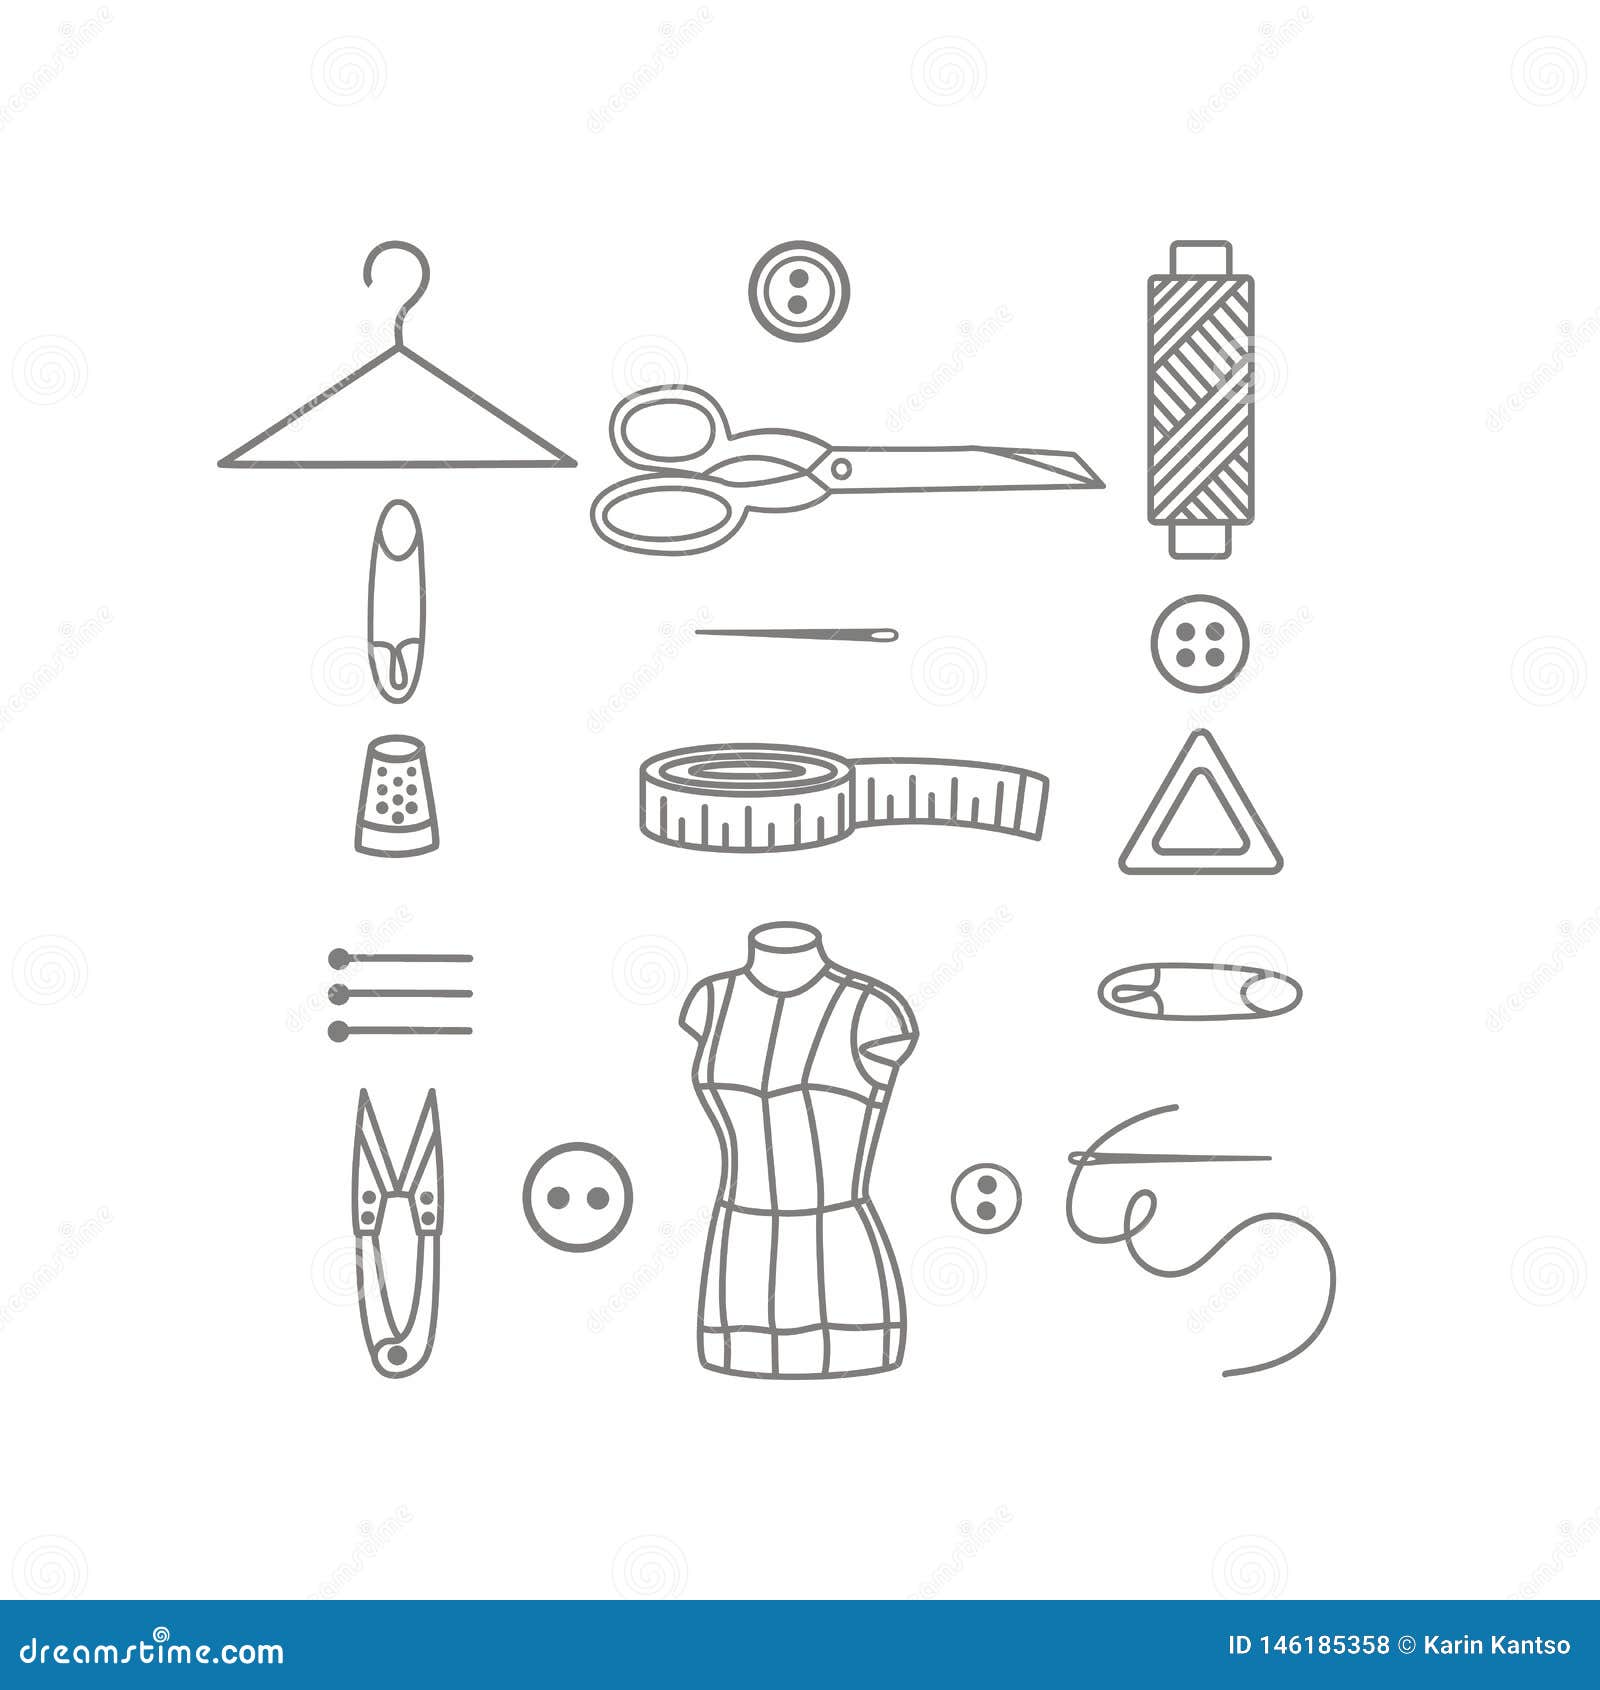 Tailor shop icons stock vector. Illustration of handicraft - 146185358